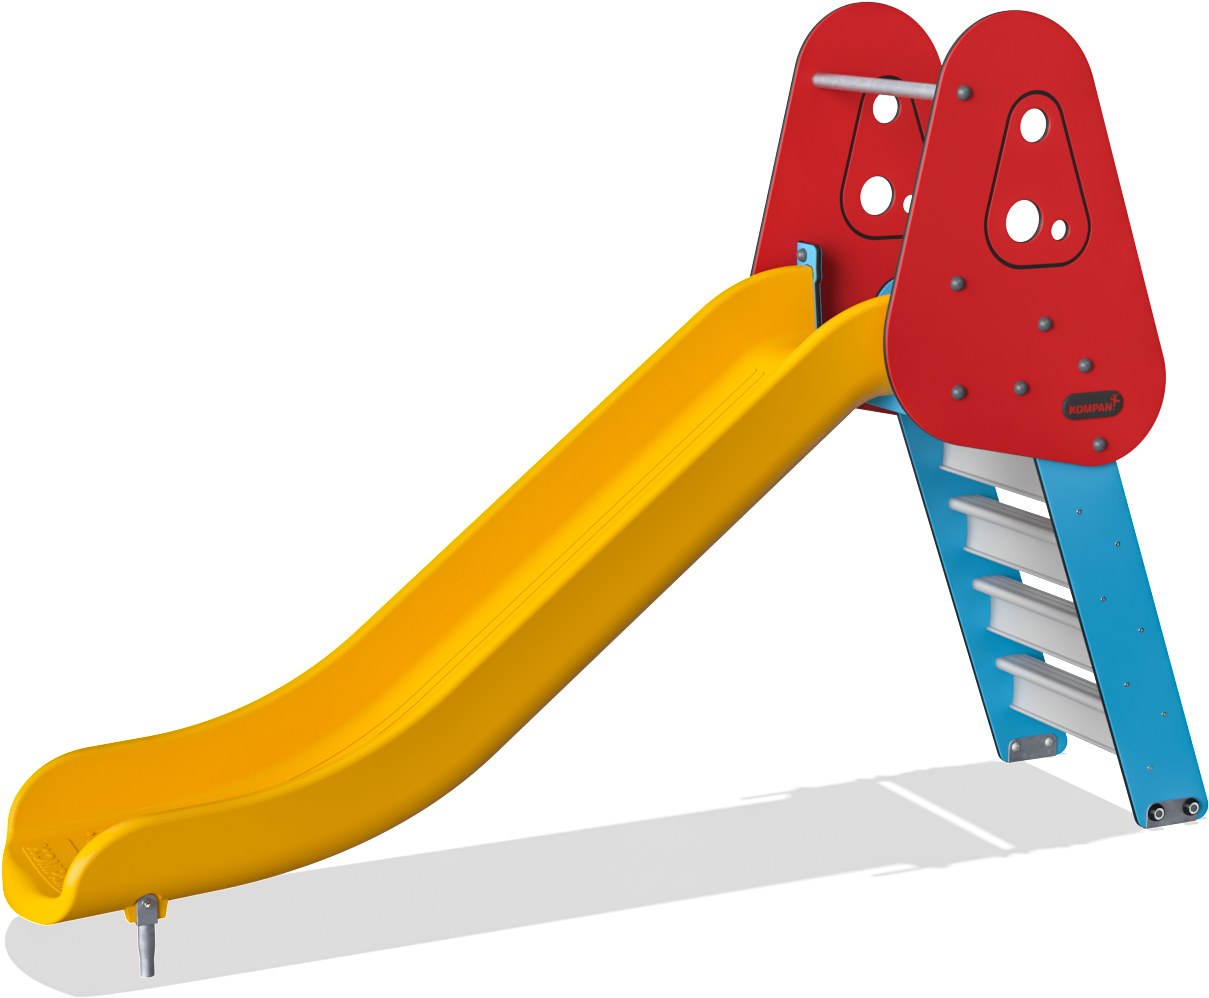 Colorful Childrens Slide Playground Equipment PNG